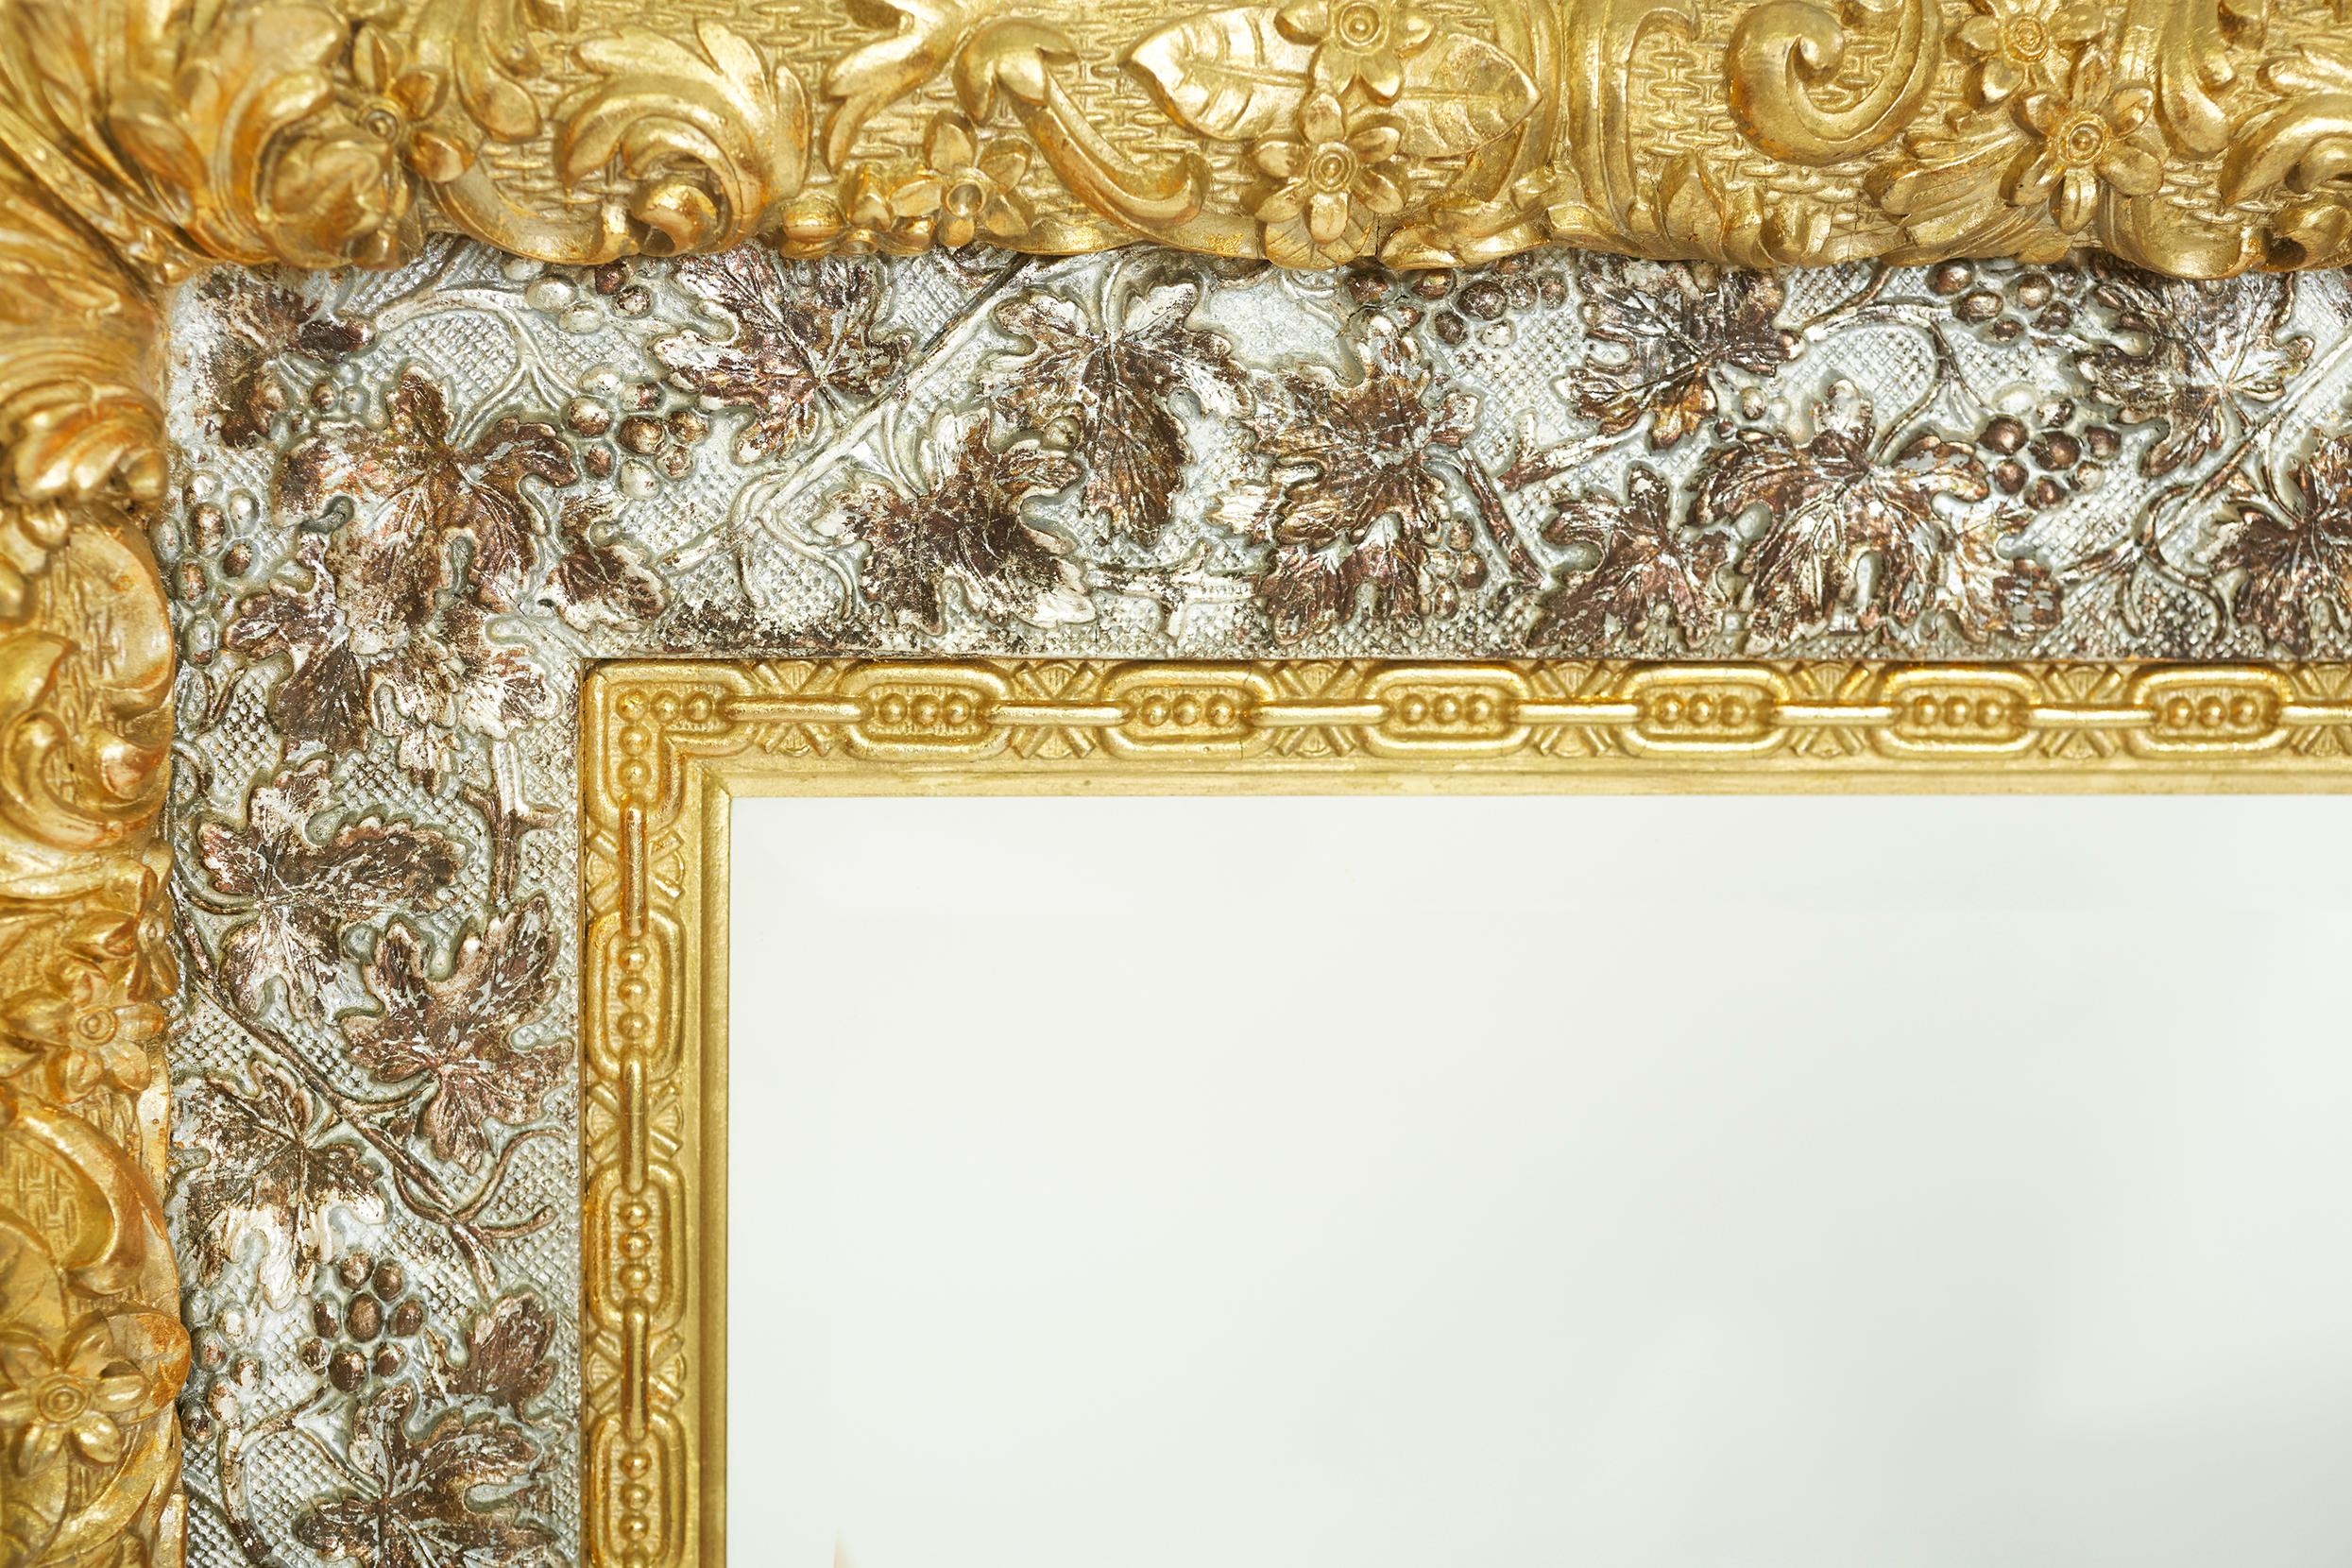 Hand-Carved 19th Century Gilt Wood Framed Beveled Wall Mirror For Sale